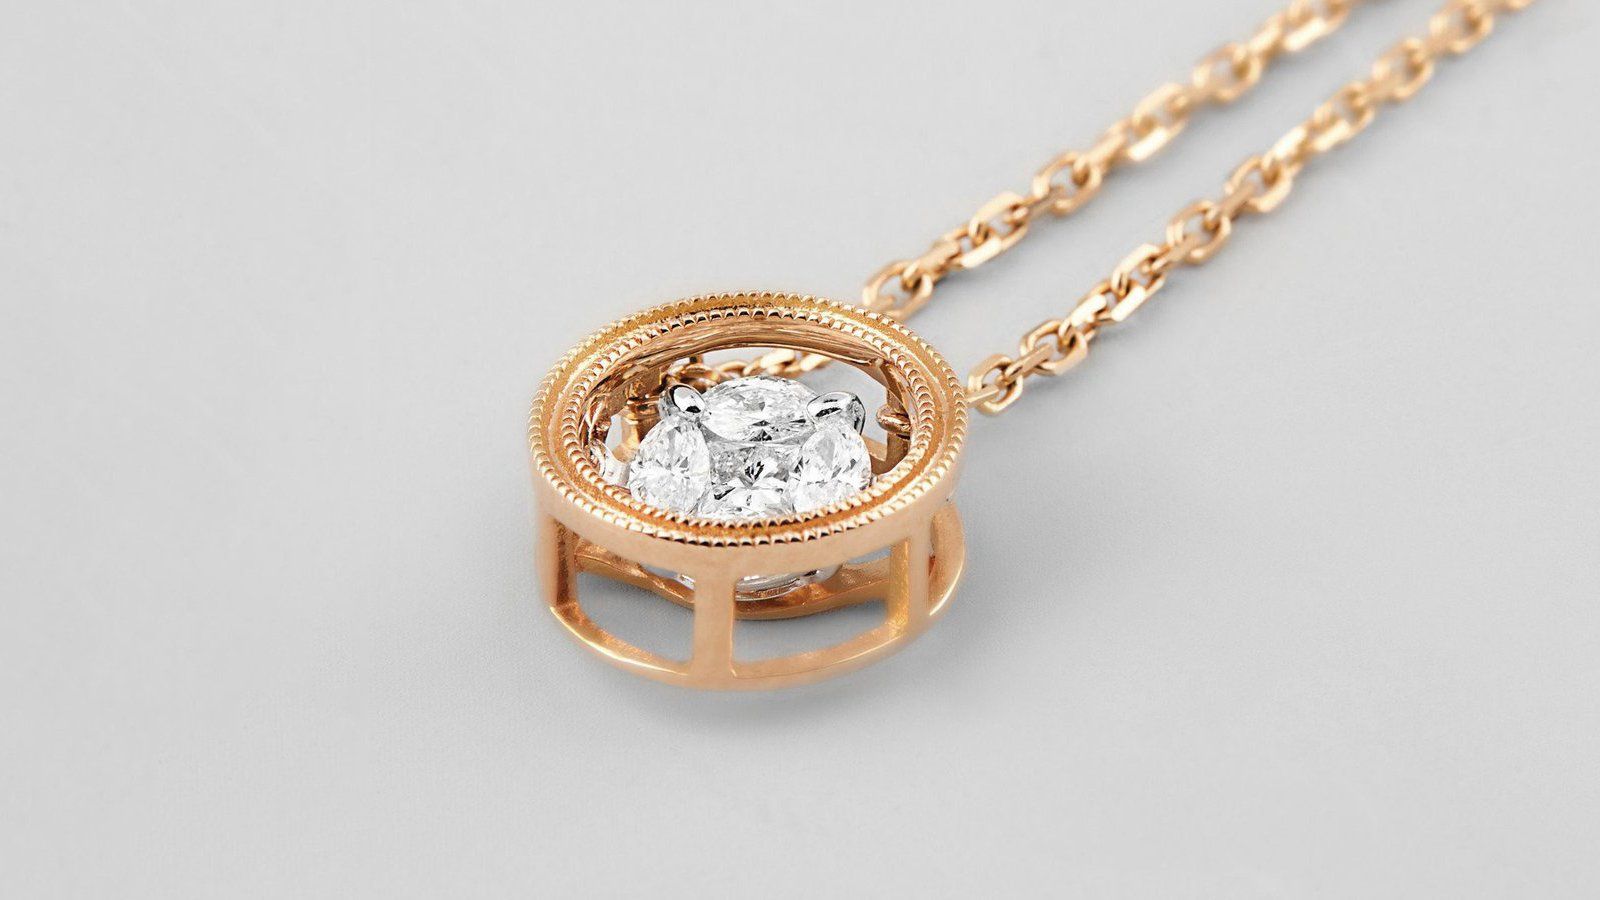 14K Yellow Gold #1 Aunt Pendant on an Adjustable 14K Yellow Gold Chain Necklace 